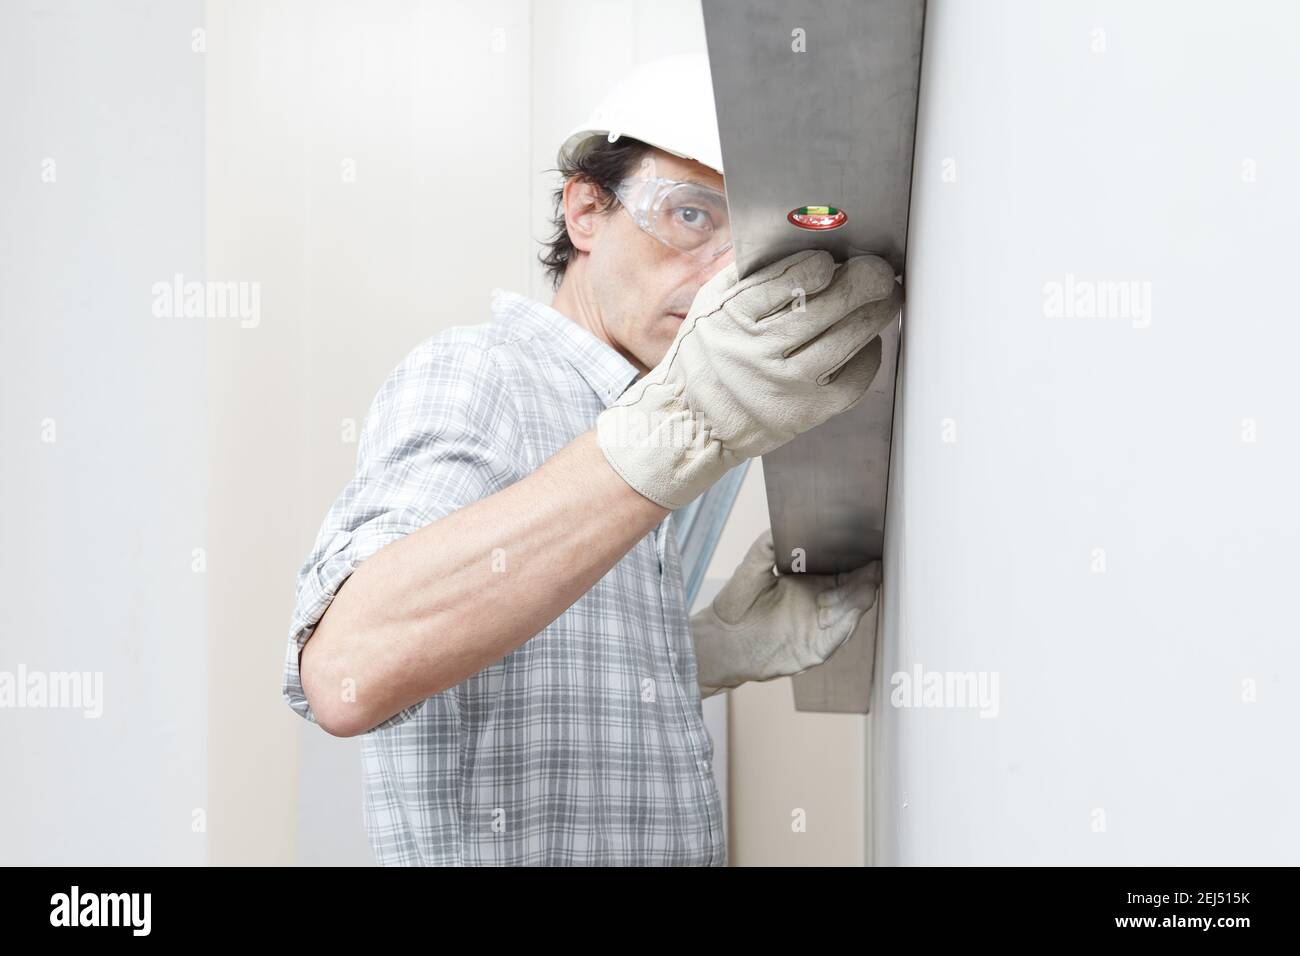 Man drywall worker or plasterer checking level of white plasterboard wall with bubble level at construction site. Wearing white hardhat, work gloves a Stock Photo